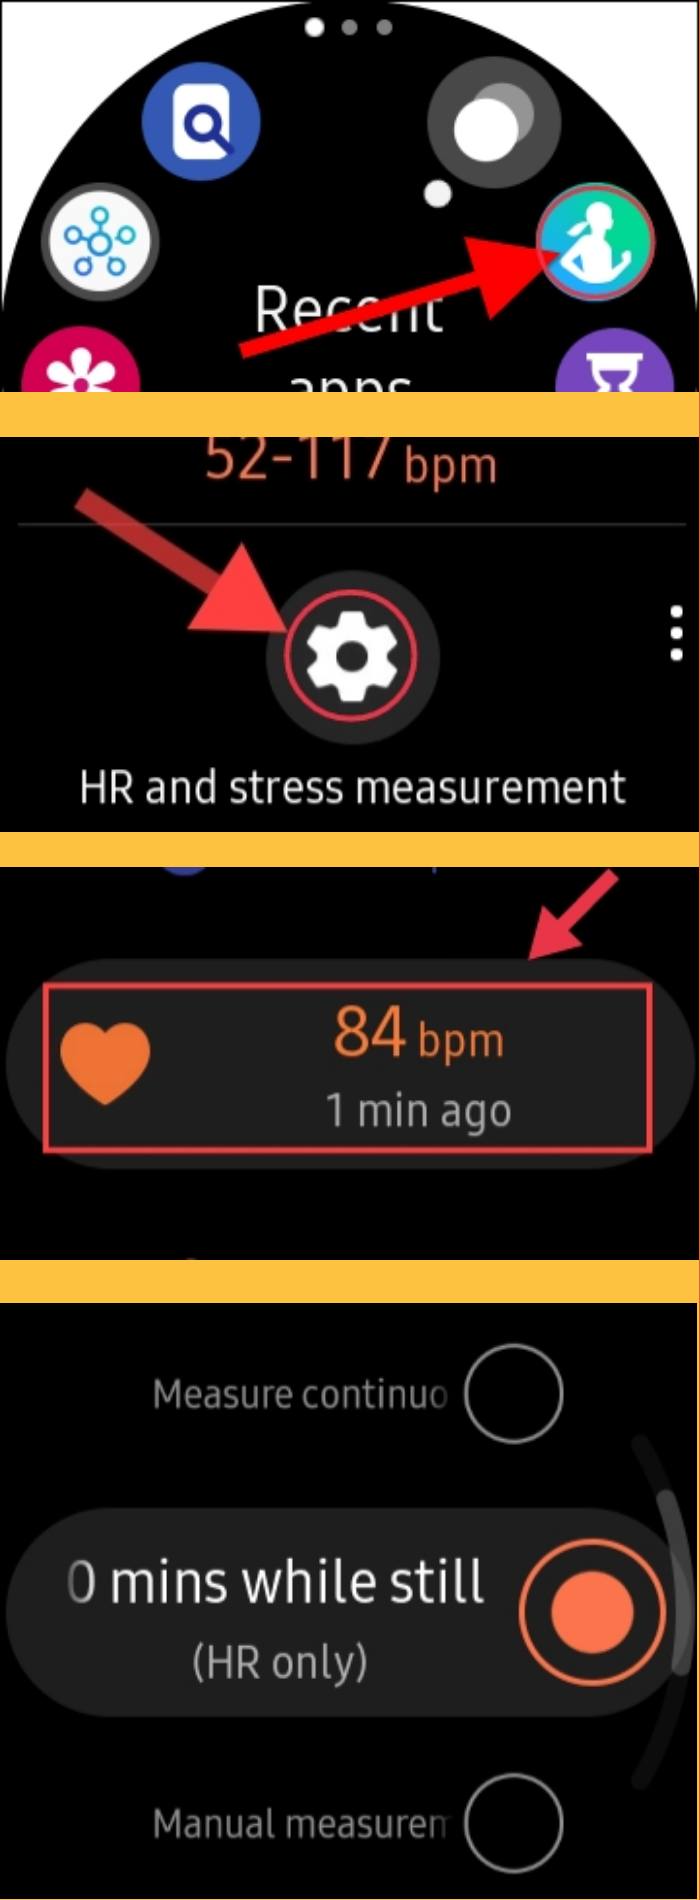 Automatically measure heart rate with your Galaxy Watch (step-by-step picture guide)
